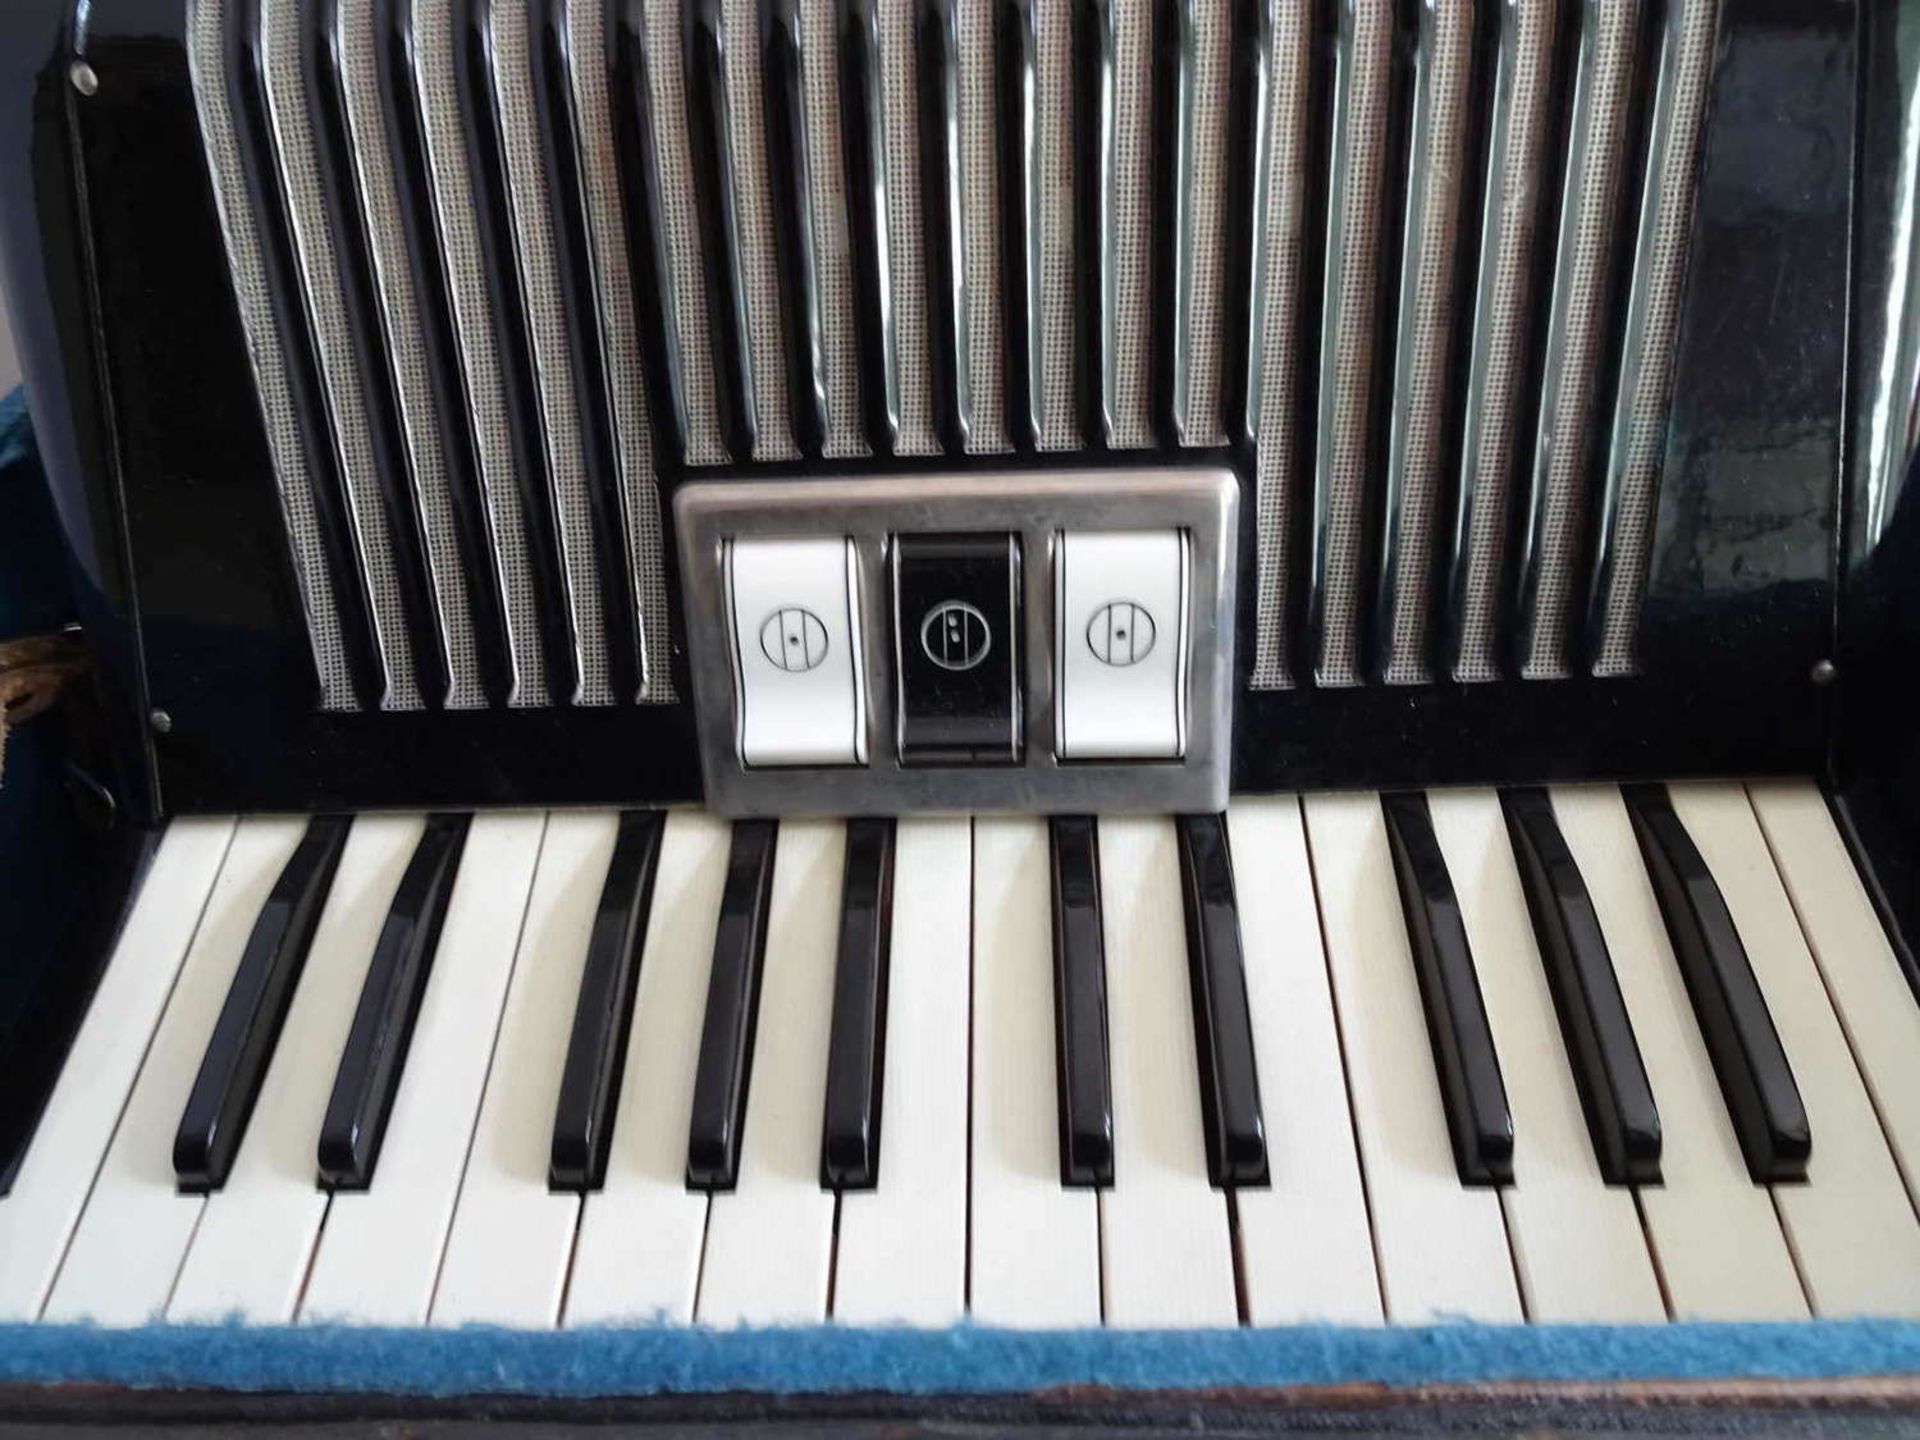 Hohner accordion student VM in a case. - Image 3 of 3